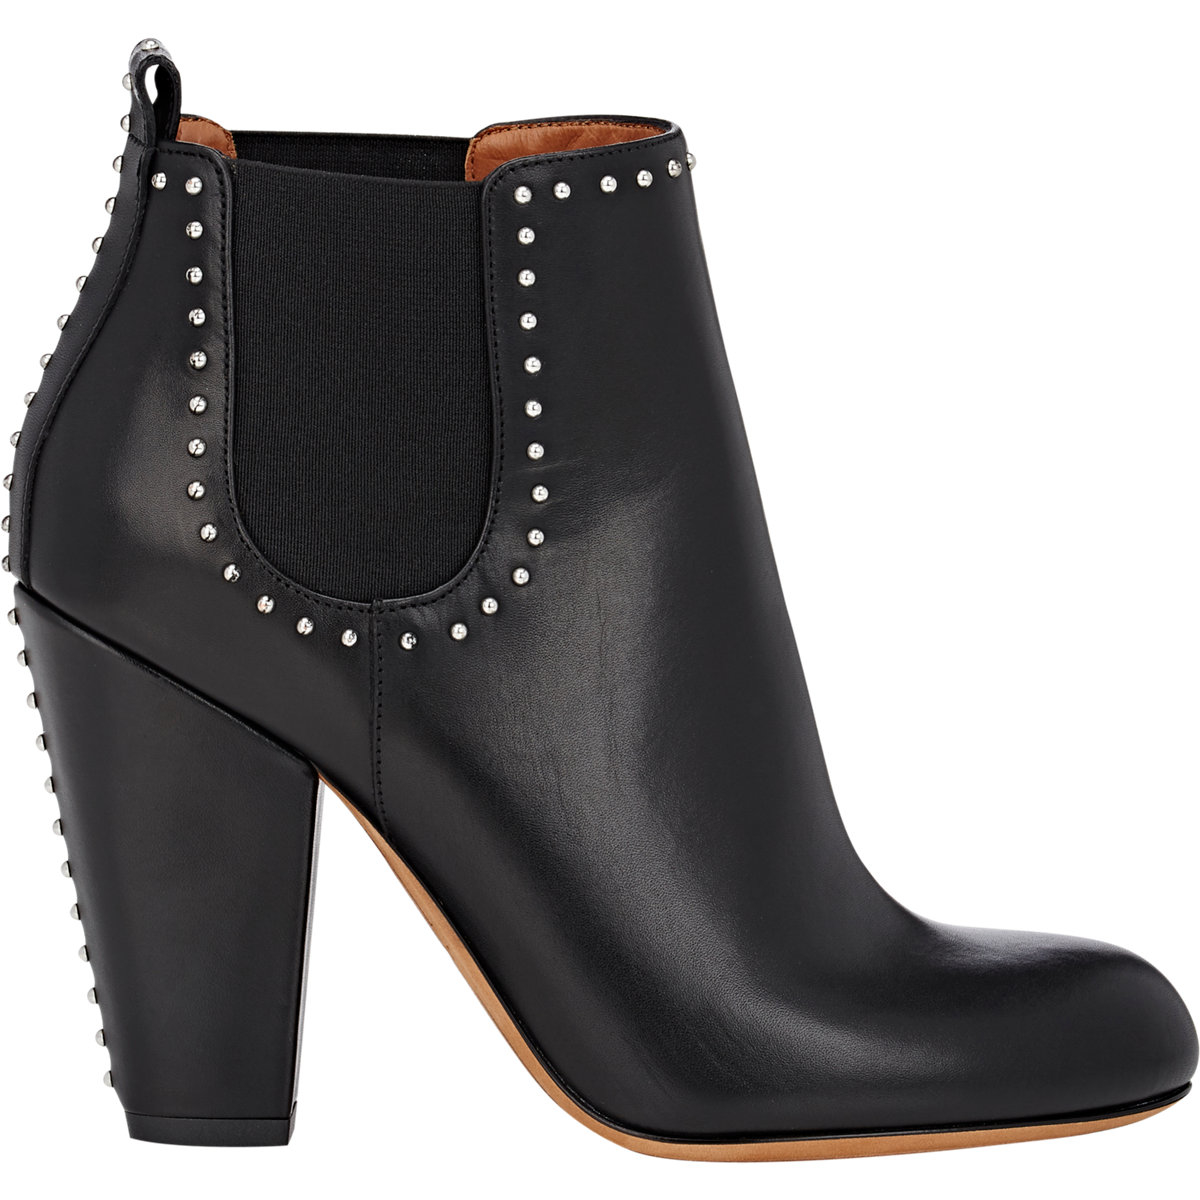 Lyst - Givenchy Women's Studded Chelsea Boots in Black